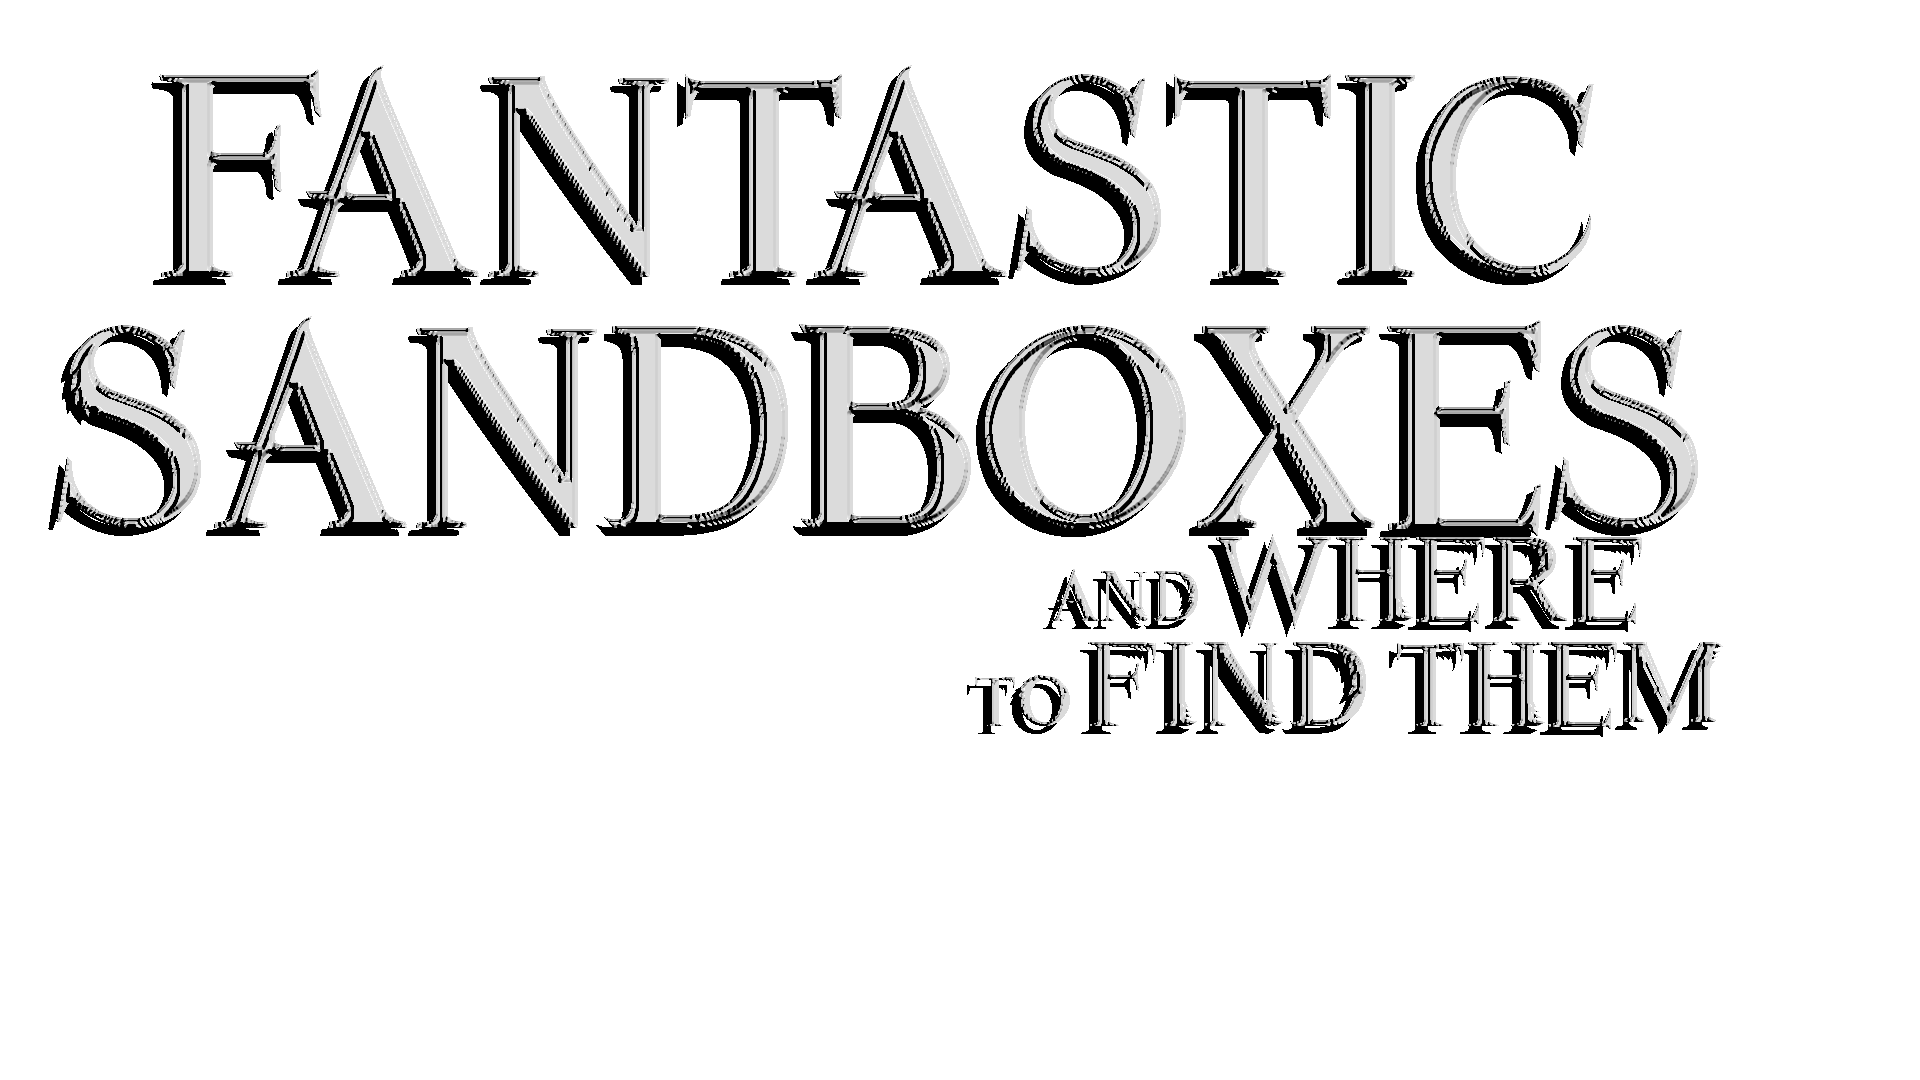 Fantastic Sandboxes and where to find them.